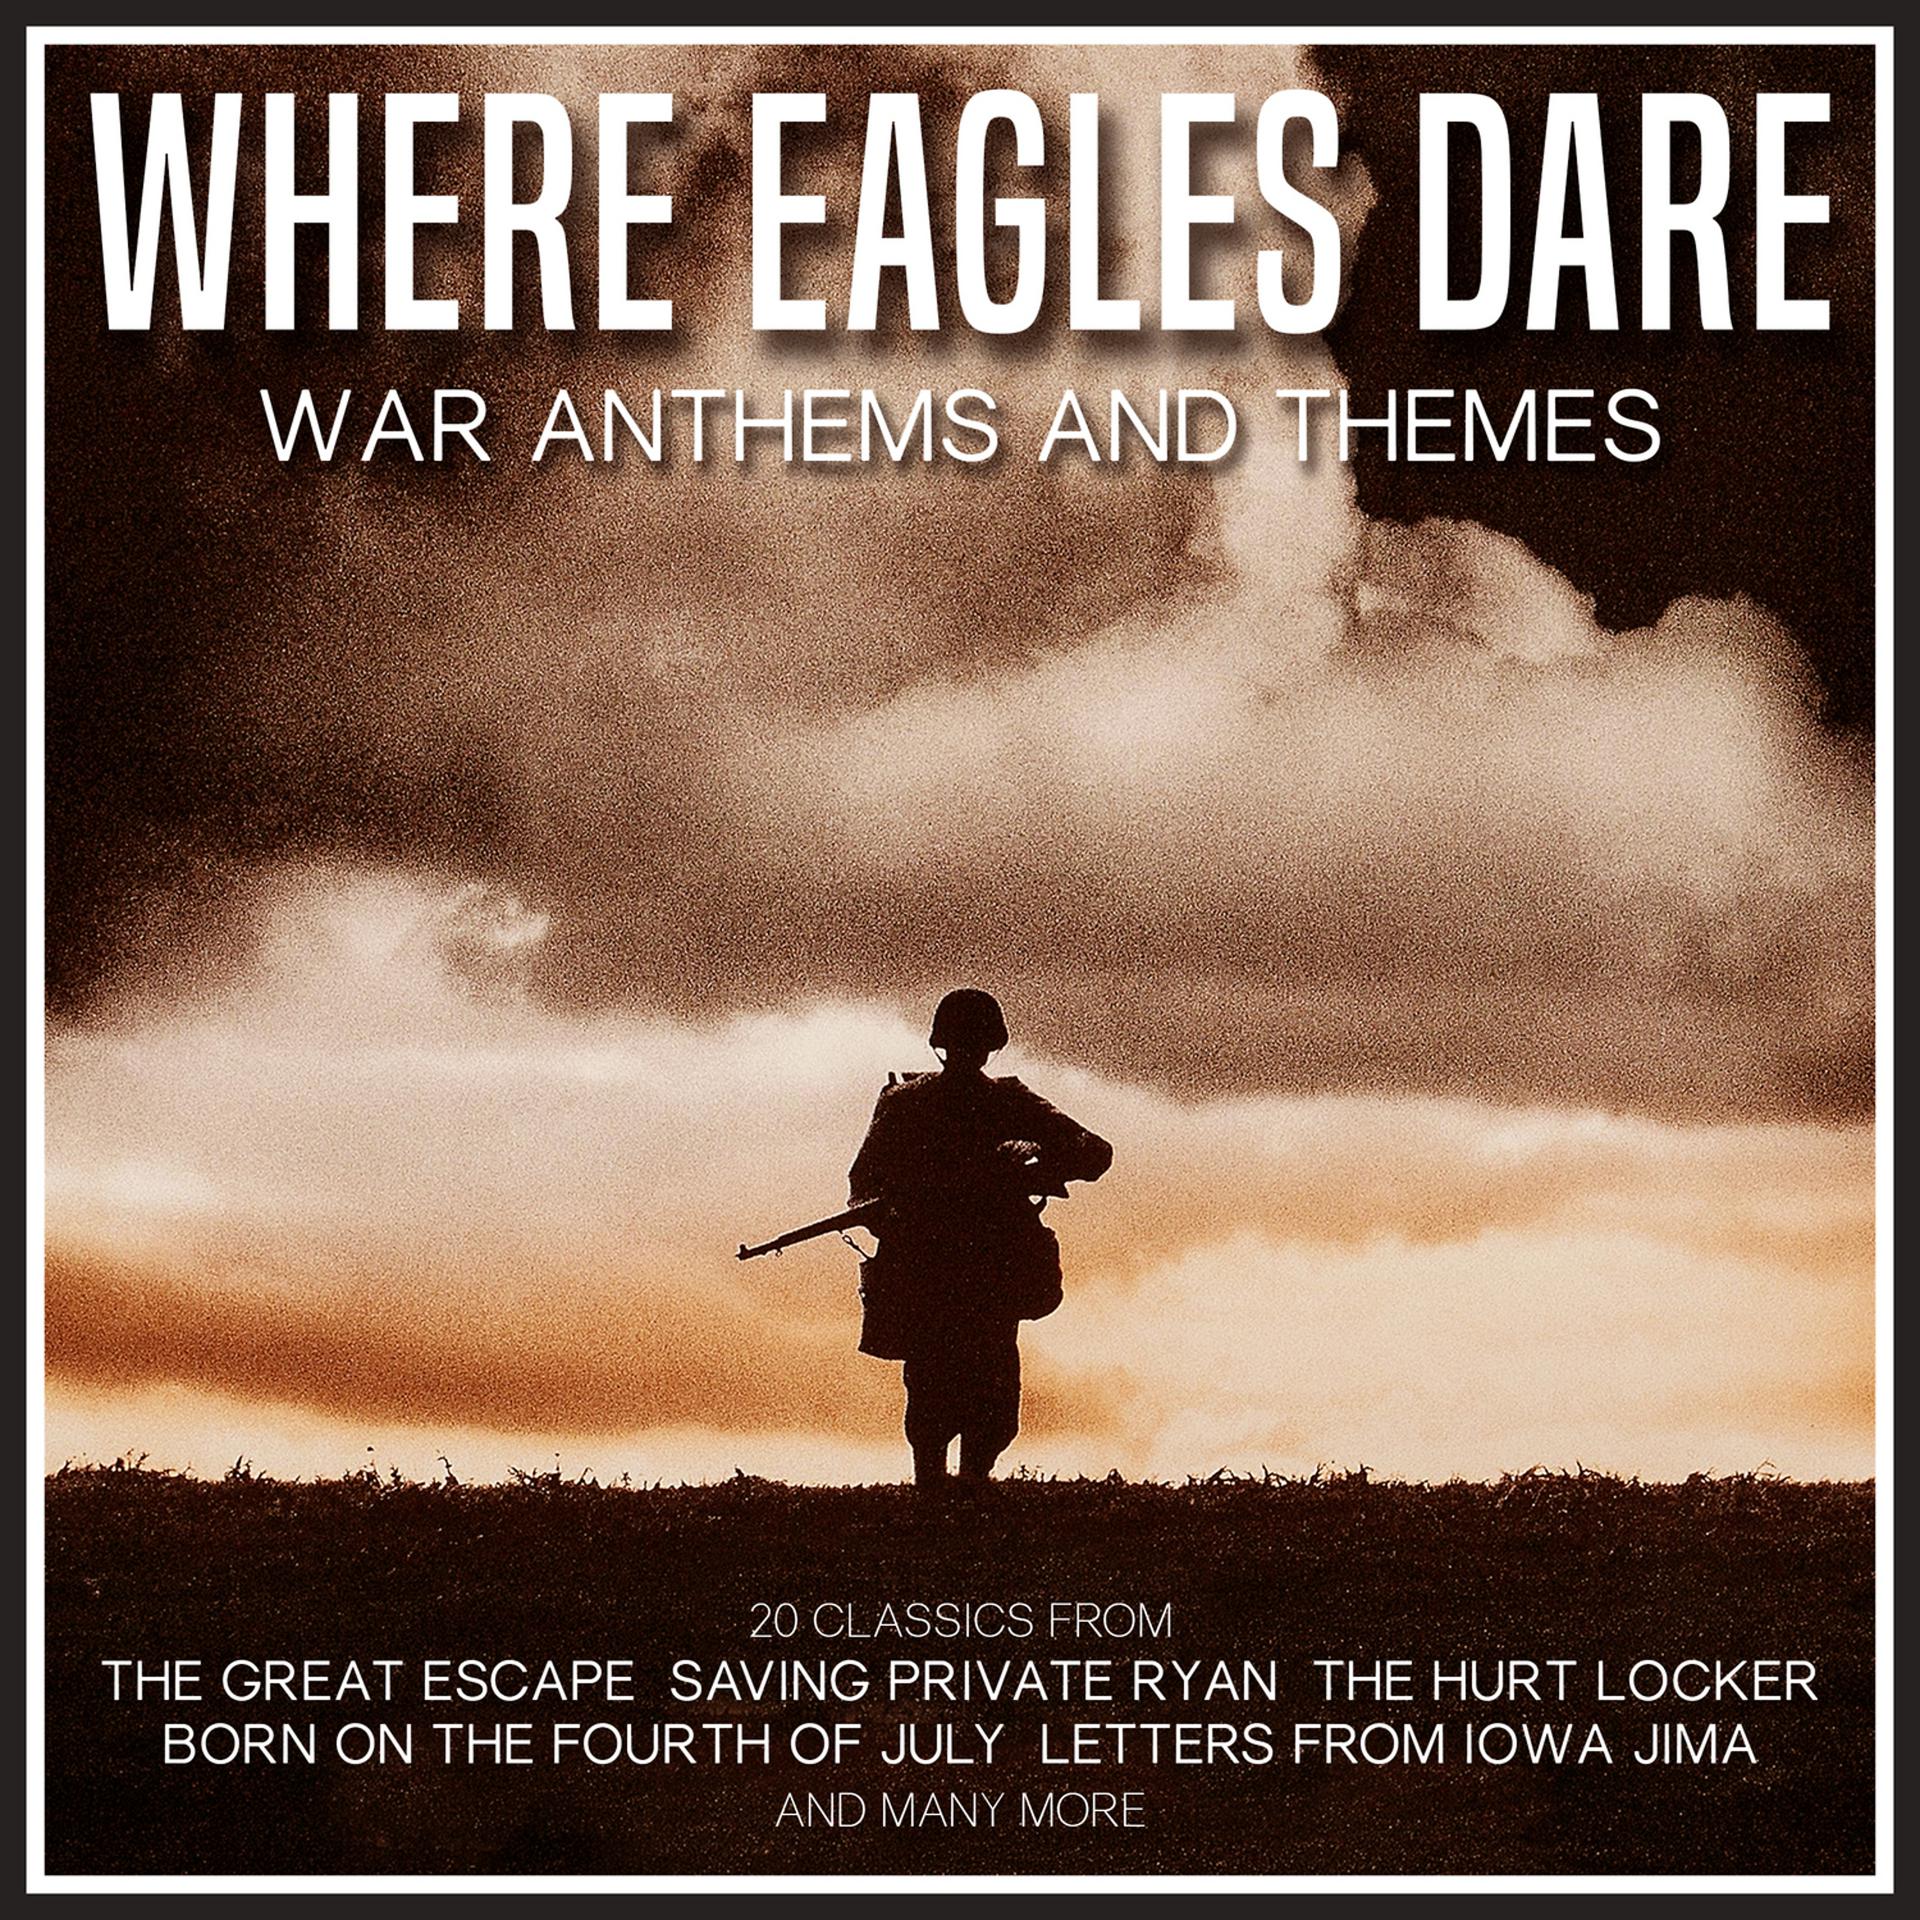 Постер альбома "Where Eagles Dare"- War Themes and Anthems